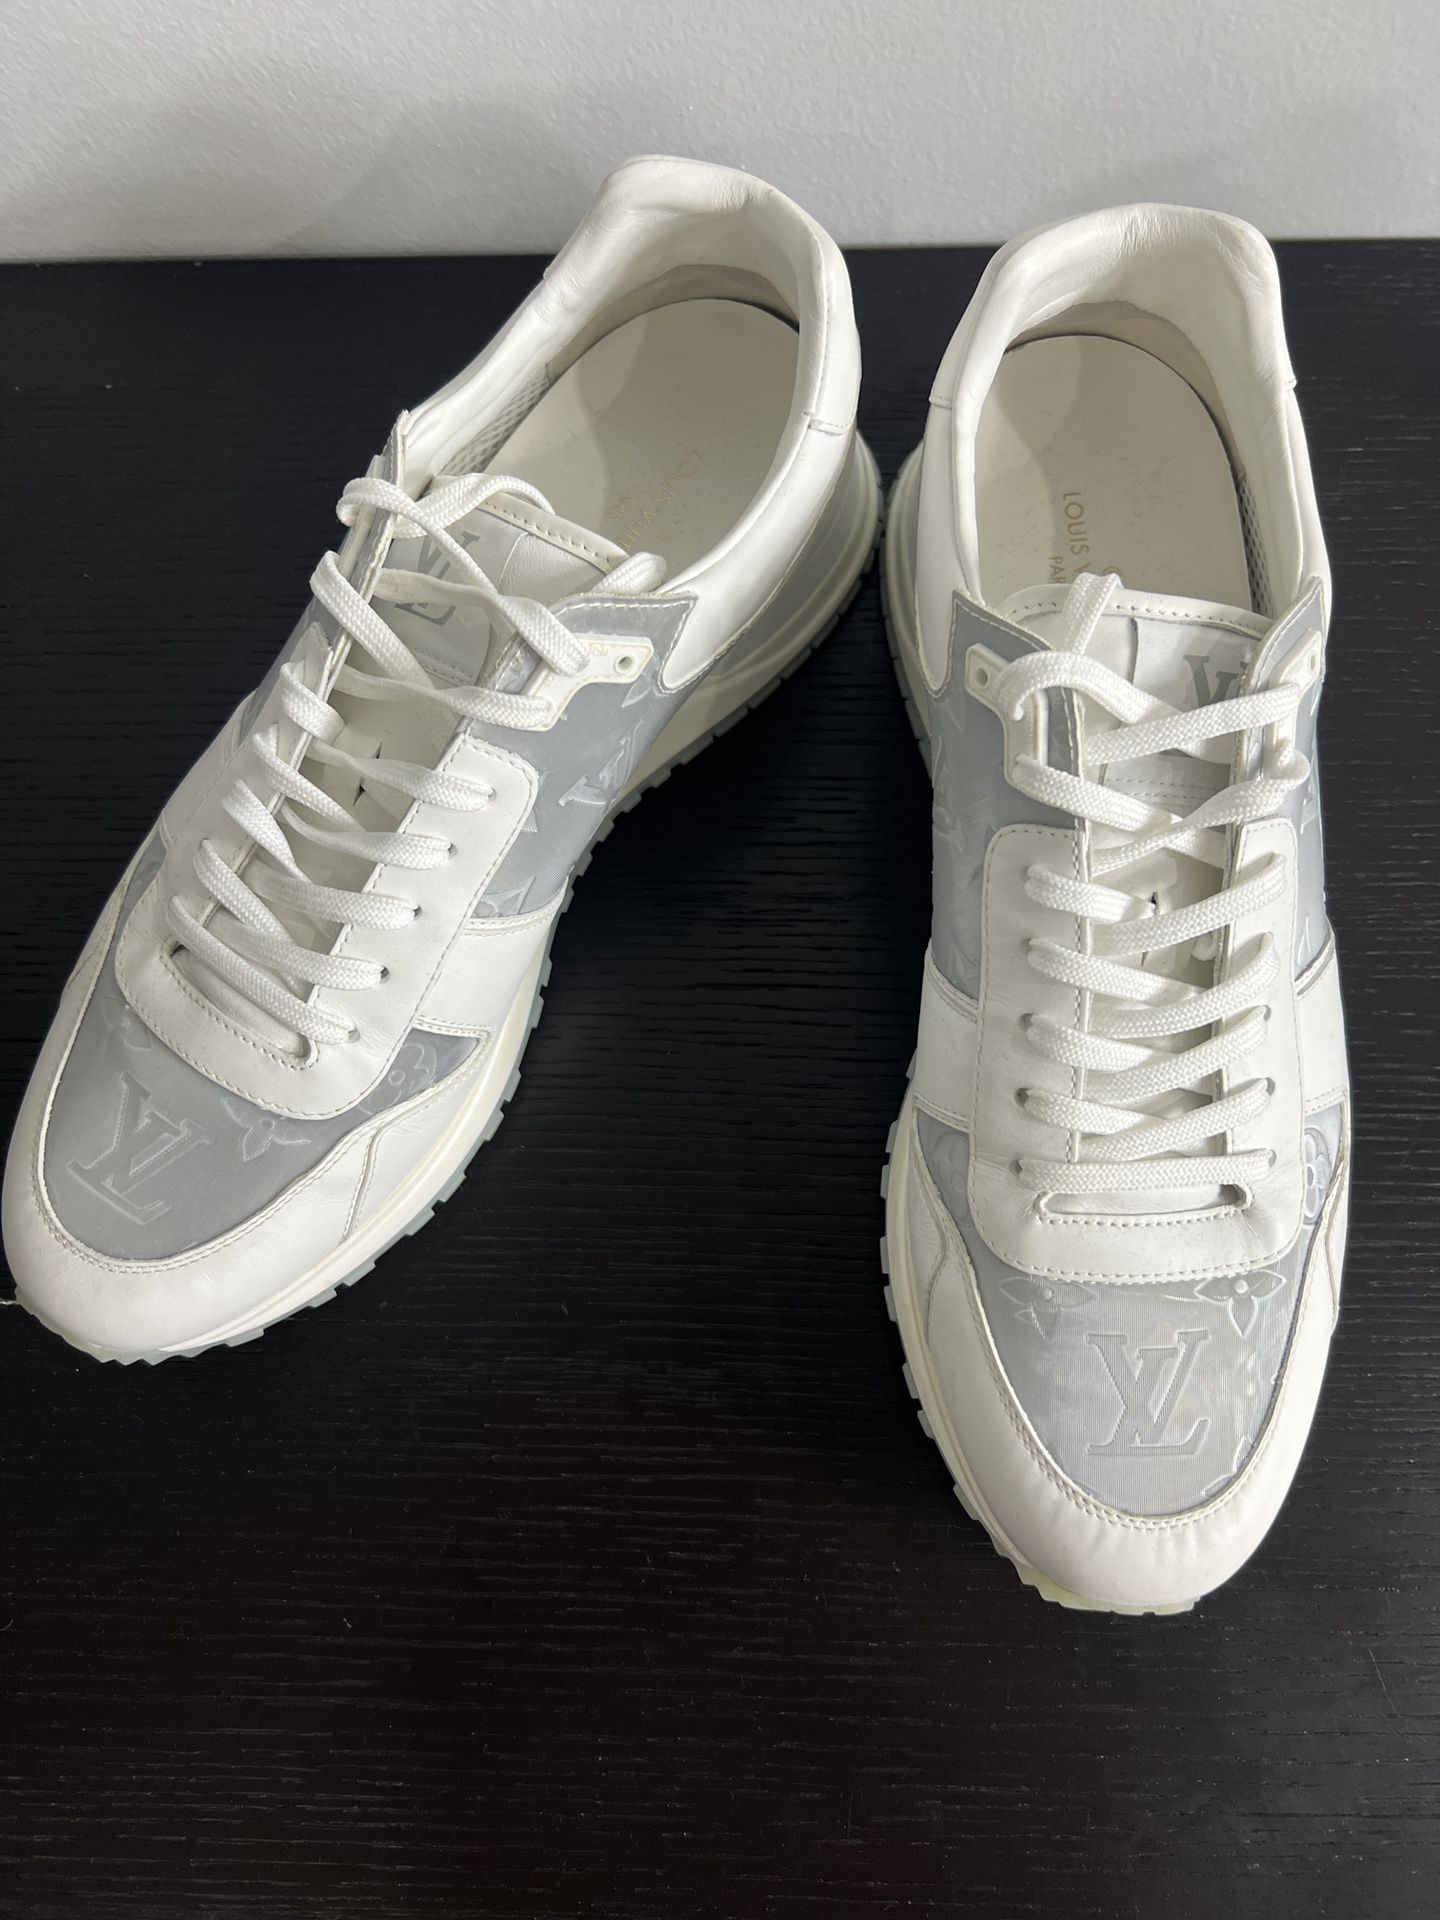 Louis Vuitton designer sneakers shoes for Sale in Medley, FL - OfferUp